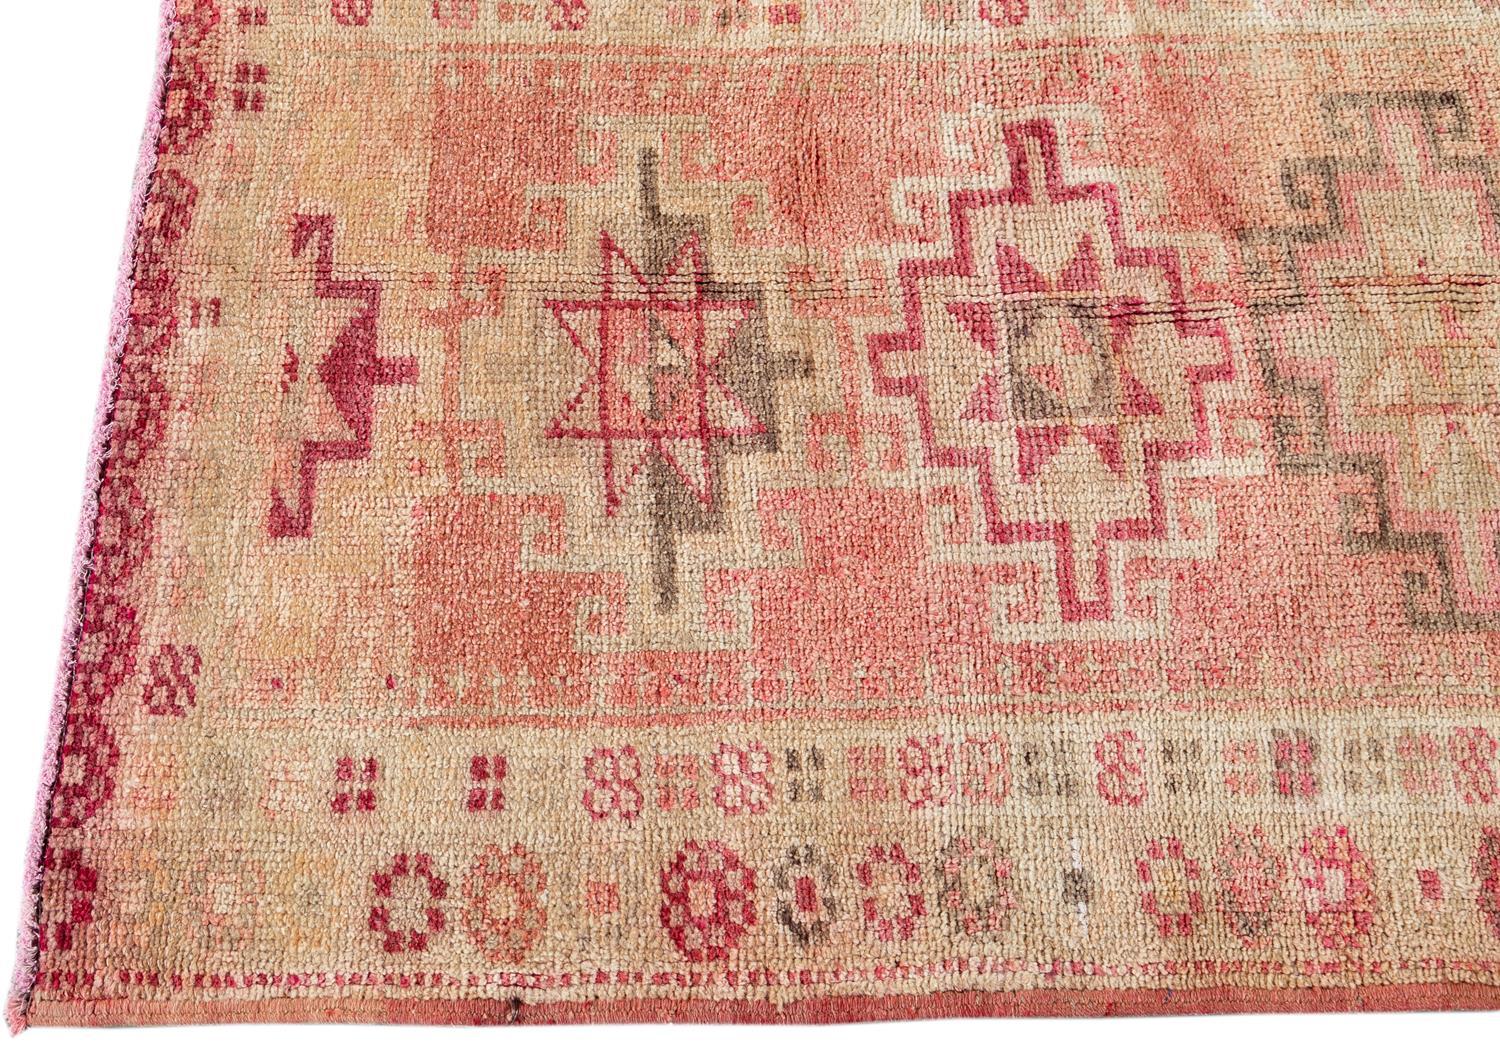 Beautiful Anatolian Village Turkish Runner rug, hand knotted wool with a coral field, ivory, tan and pink accents in geometric multi medallion design.

 This rug measures 2' 10